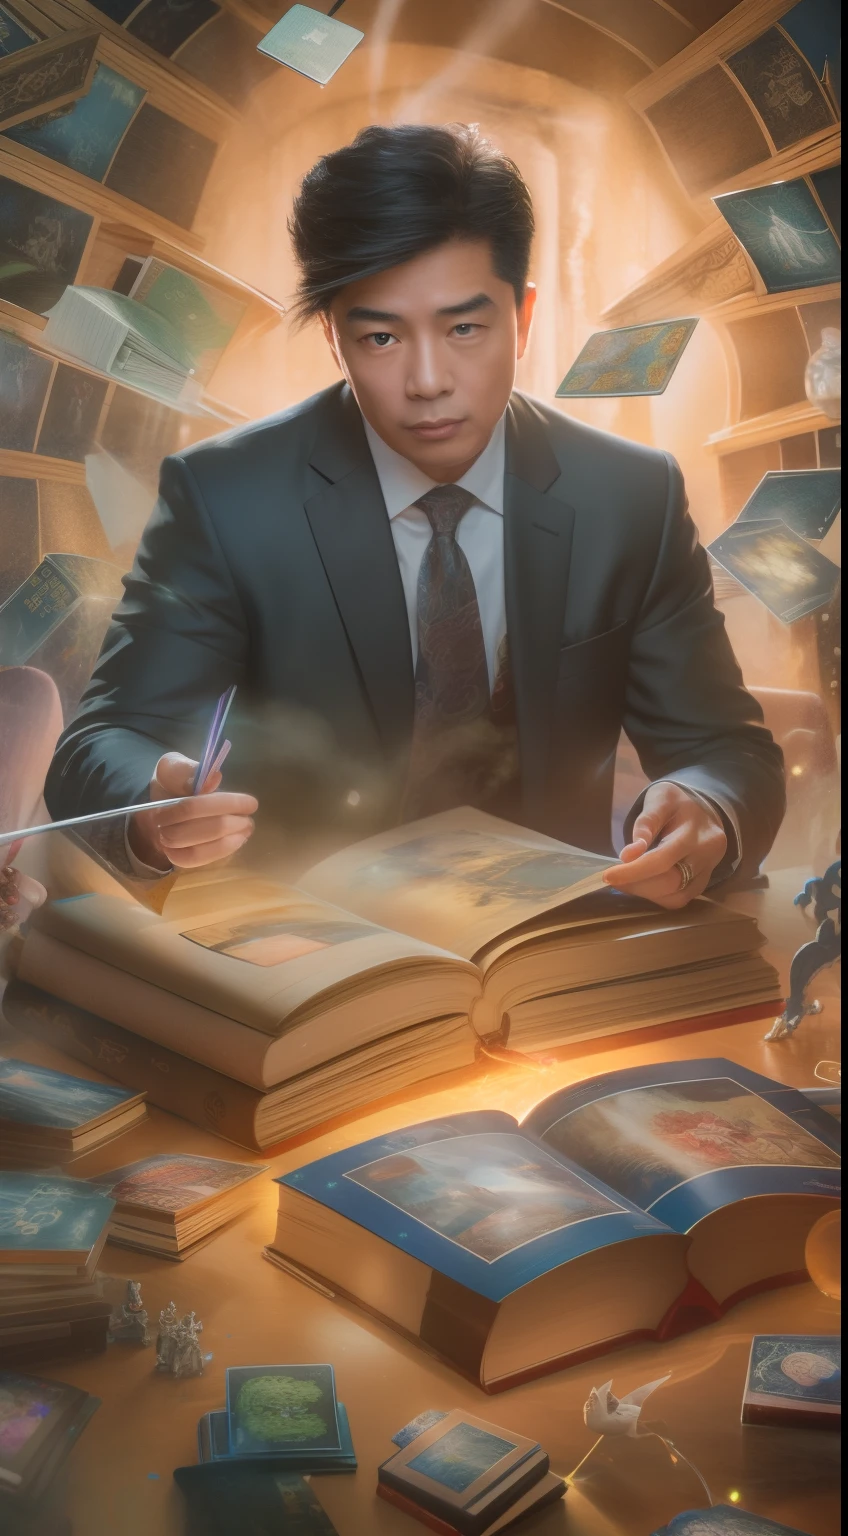 A detailed painting depicting a handsome, mature Asian man in a suit surrounded by a flurry of glowing magic cards and the book Dungeons and Dragons in the center.